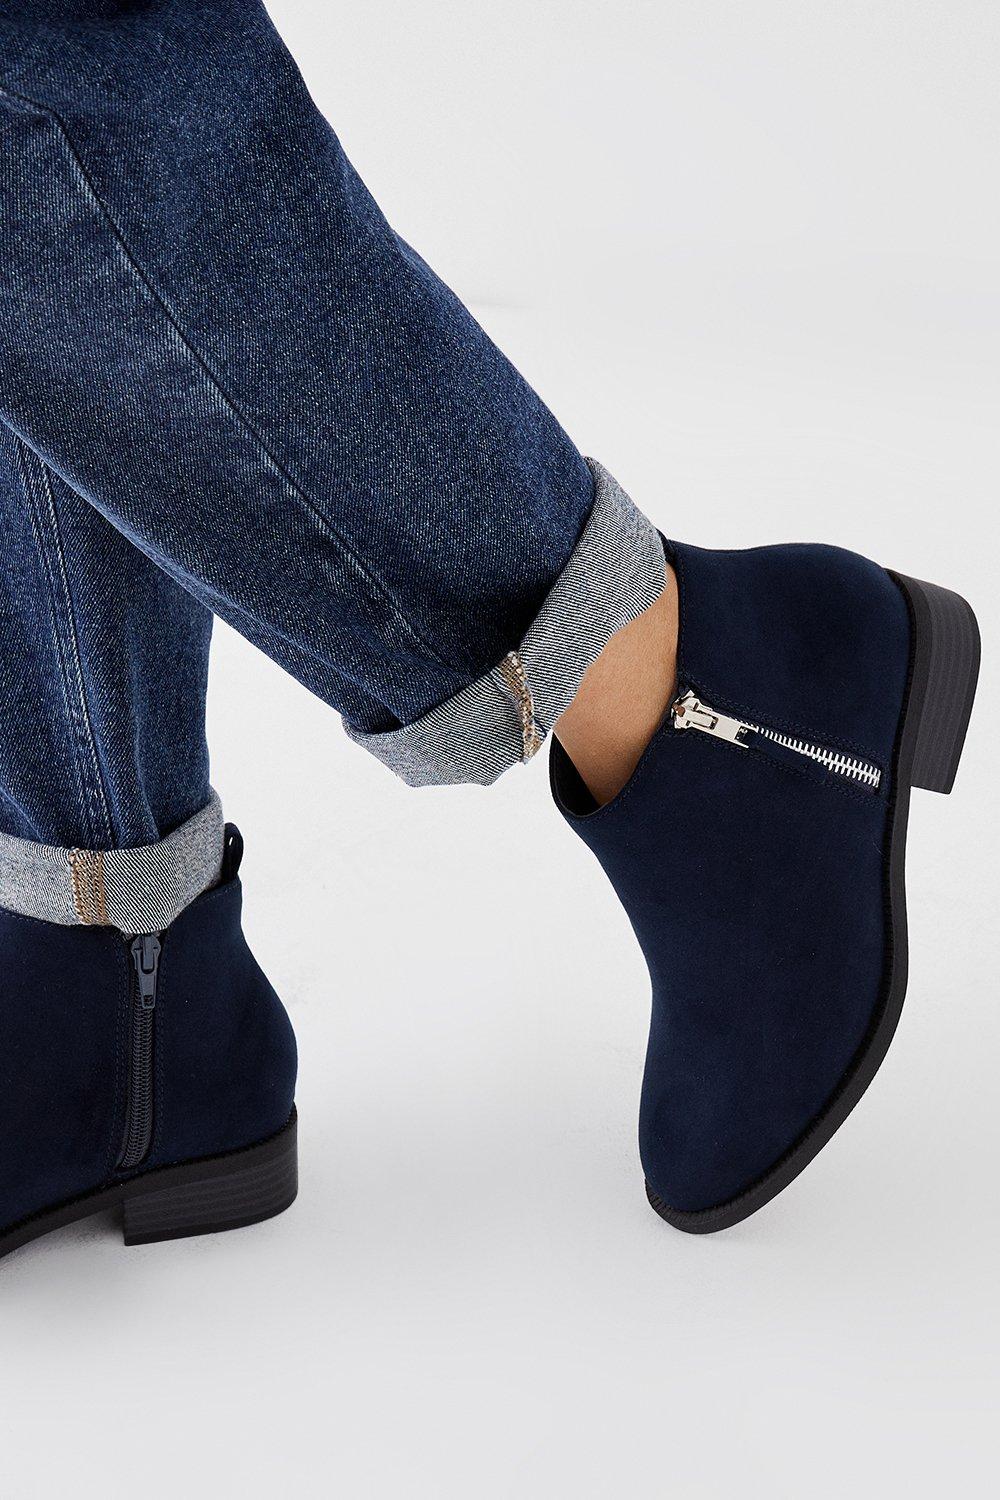 Women’s Wide Fit Madrid Zip Up Ankle Boots - navy - 7